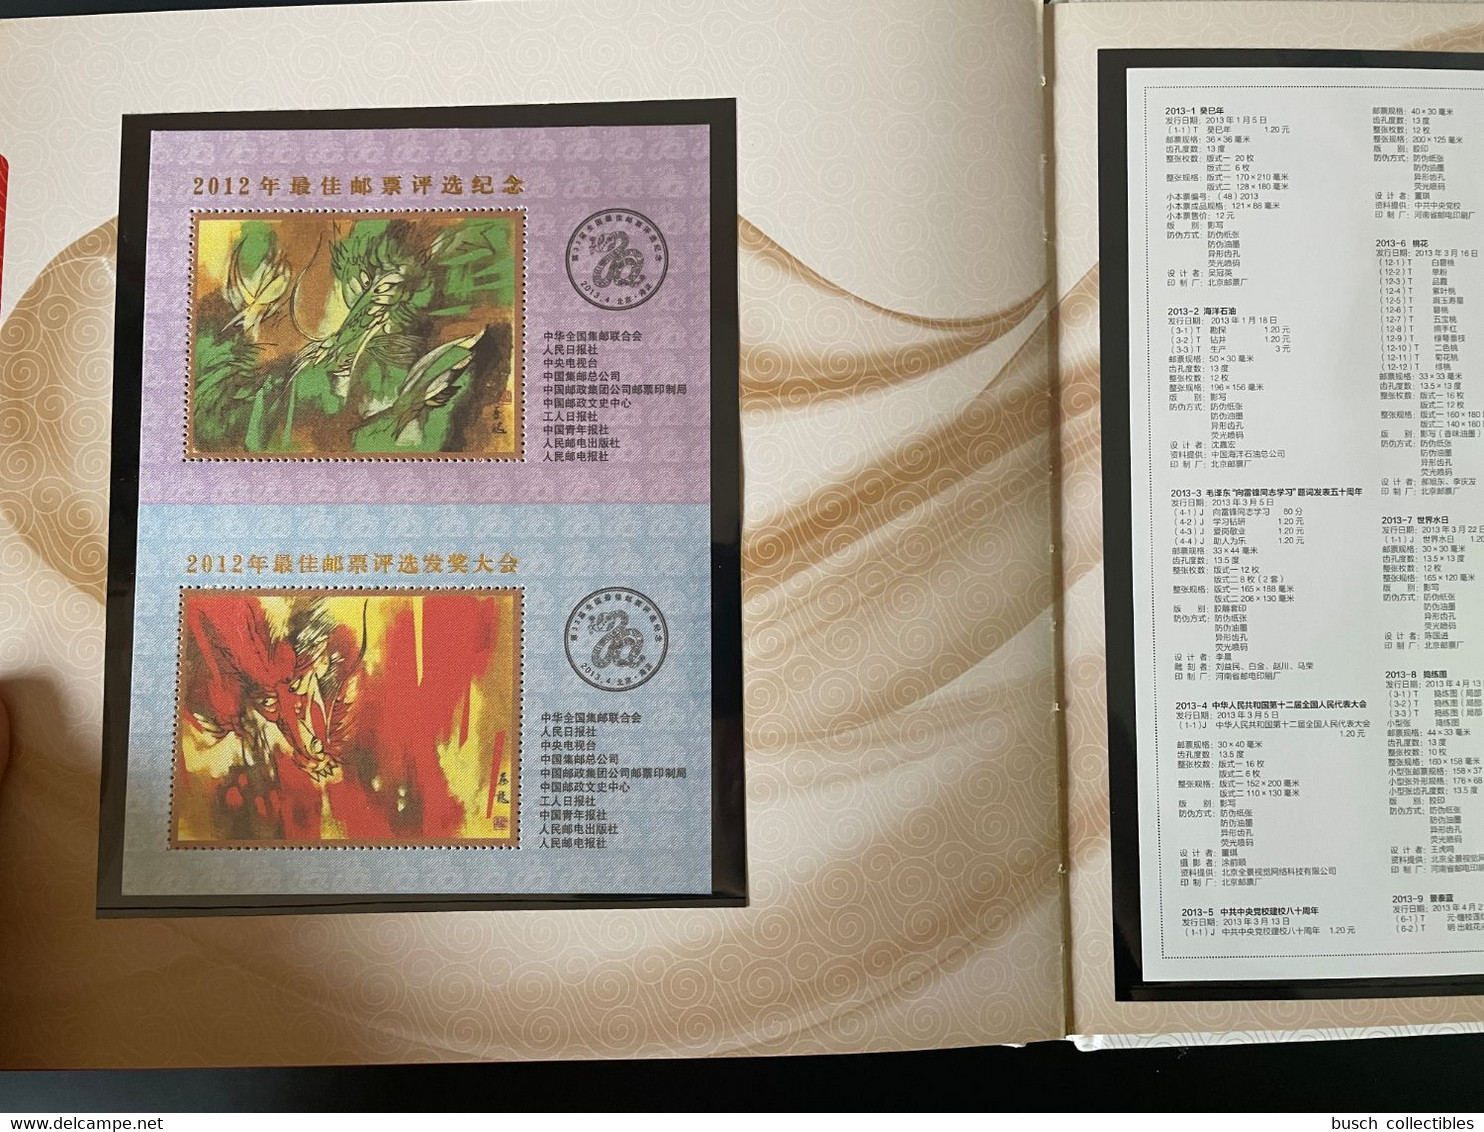 China Chine 2013 stamp Postage Stamps book with stamps, coin, disc and phone card